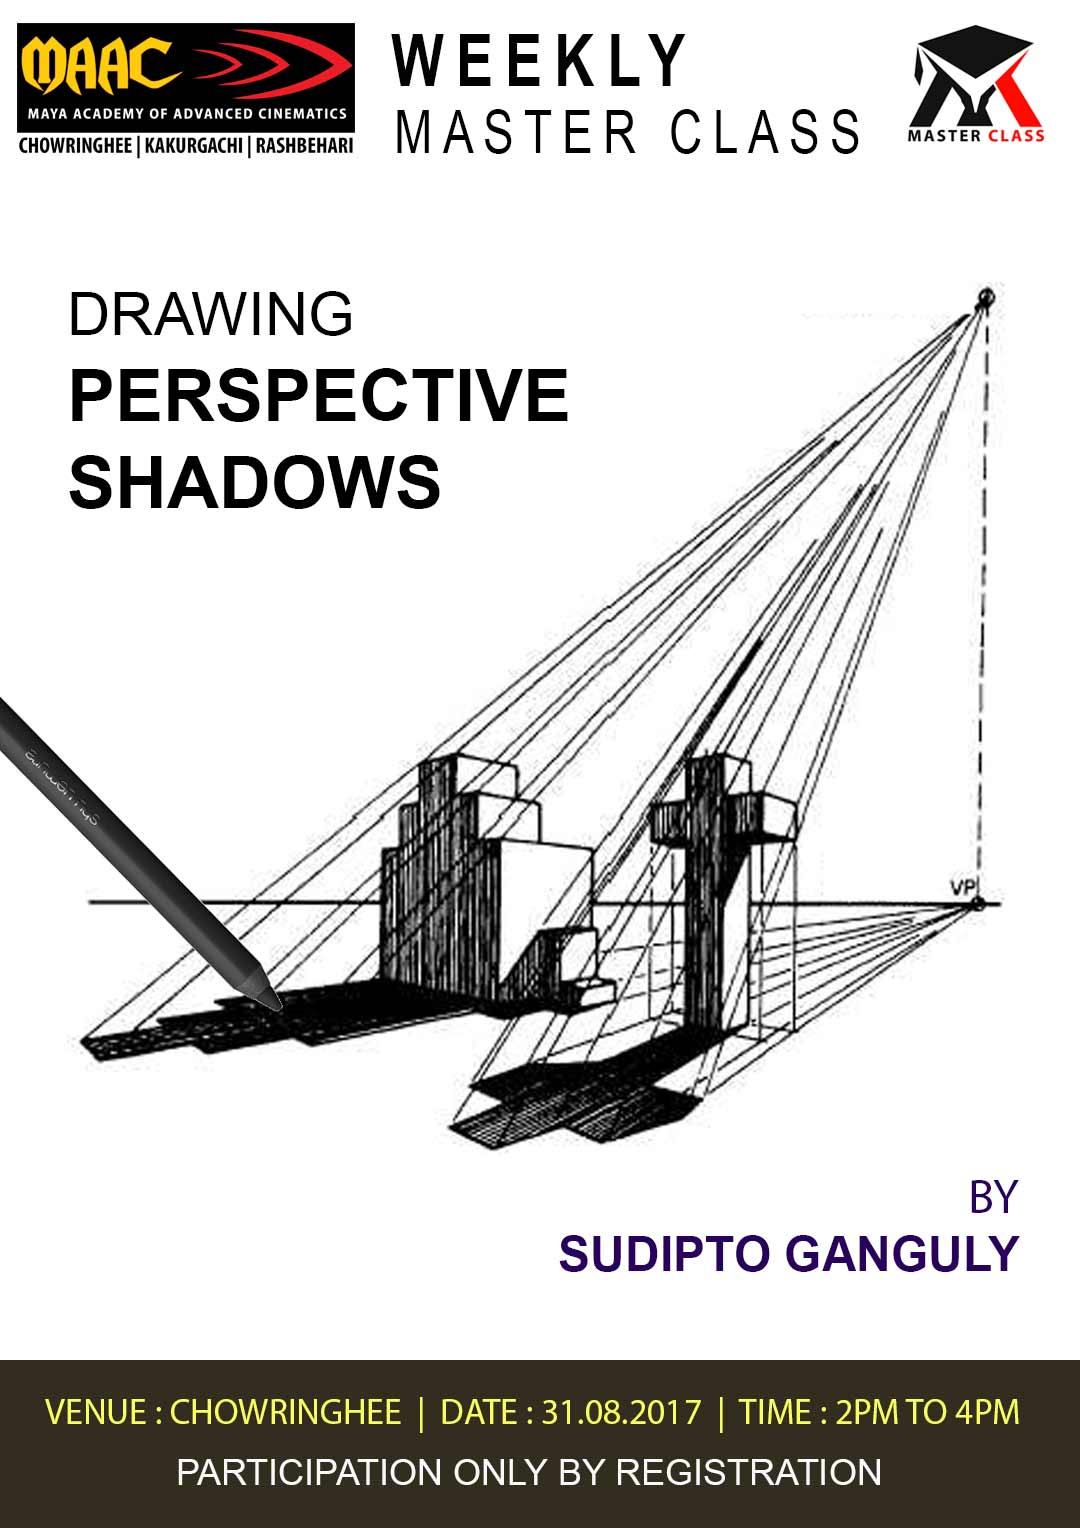 Weekly Master Class on Drawing Perspective Shadows - Sudipto Ganguly